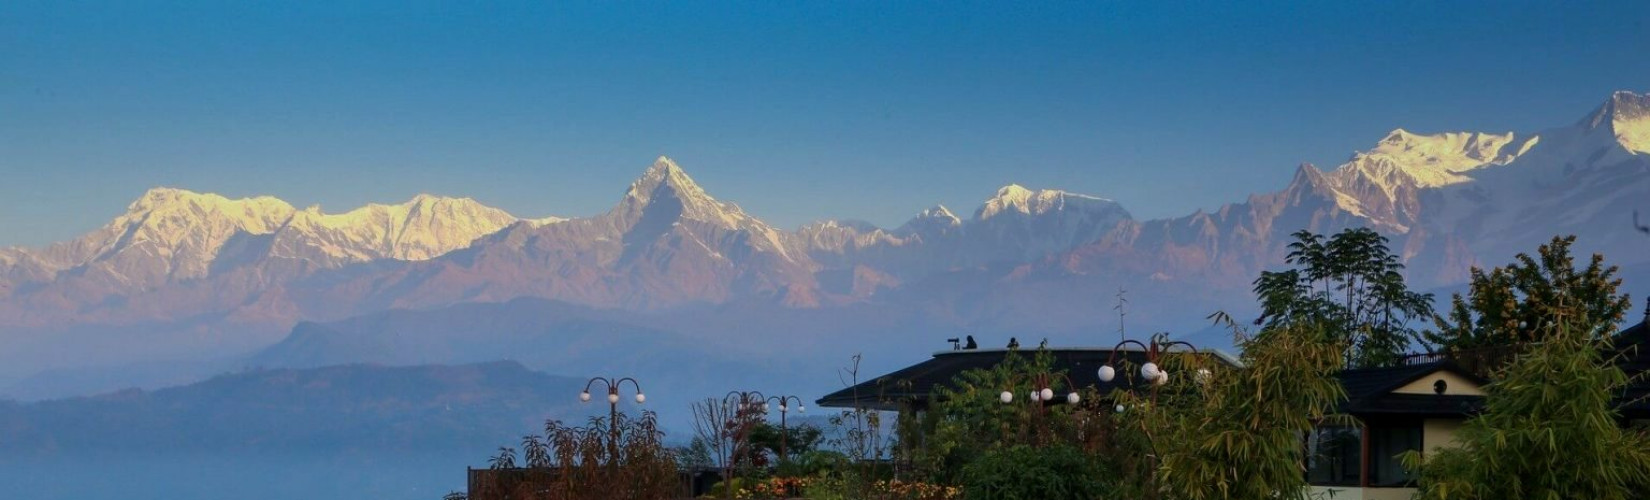 Top Luxury Tour Destinations in Nepal